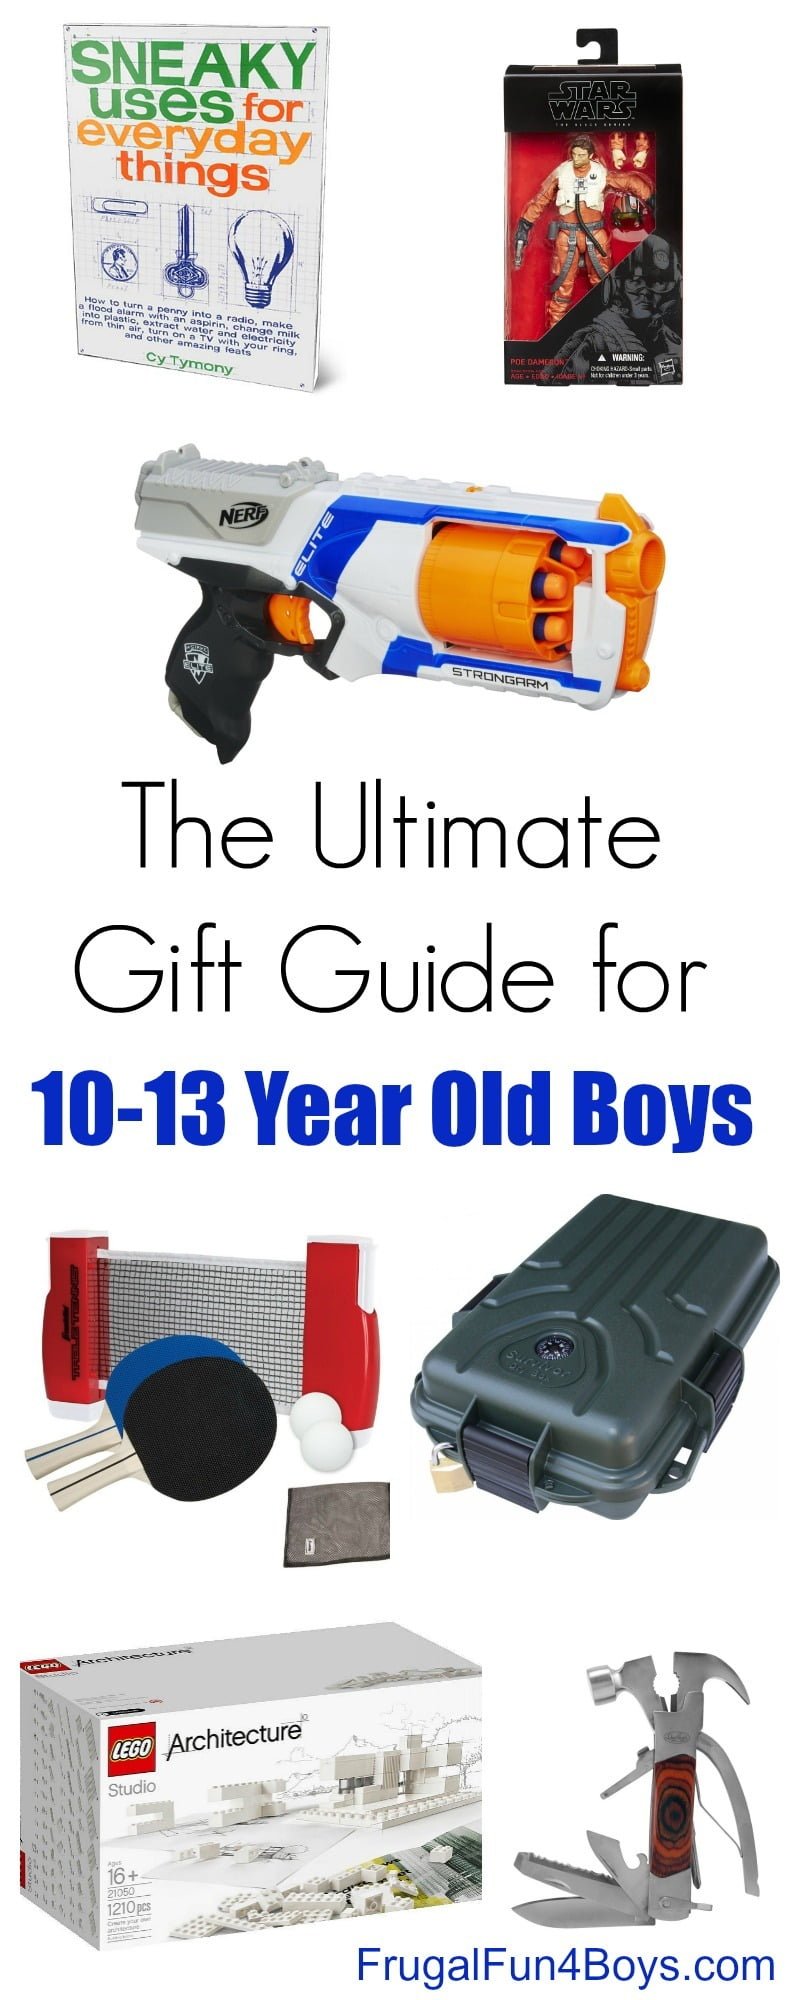 Gift Ideas For 10 To 13 Year Old Boys â Frugal Fun For Boys And Girls